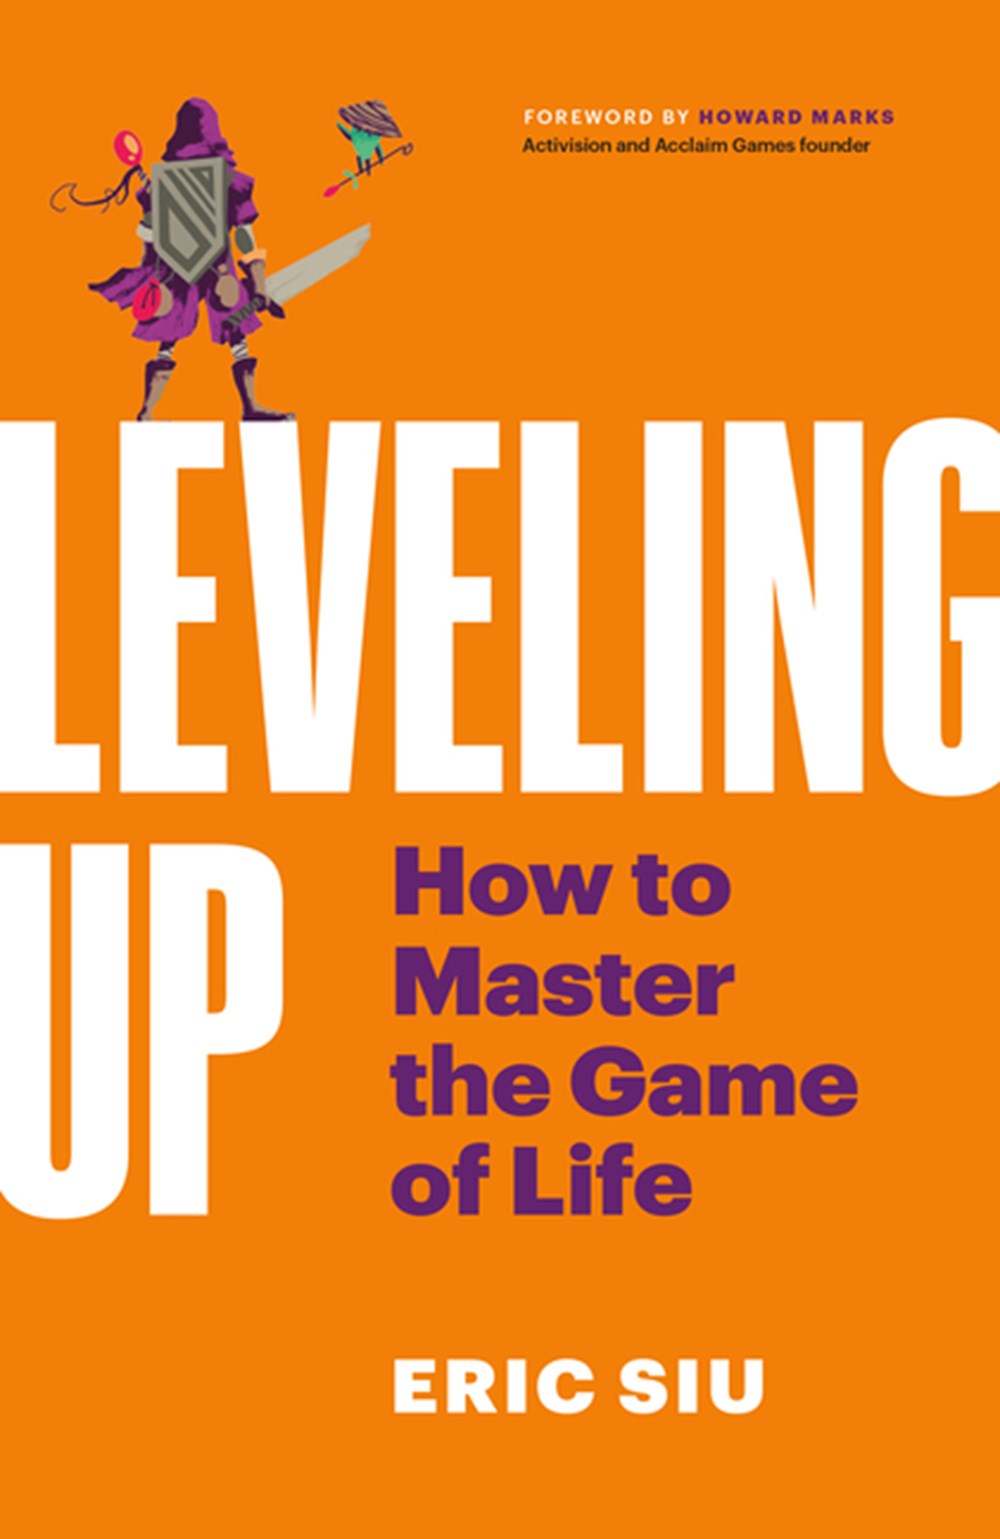 Buy Leveling Up How to Master the Game of Life by Eric Siu, Howard